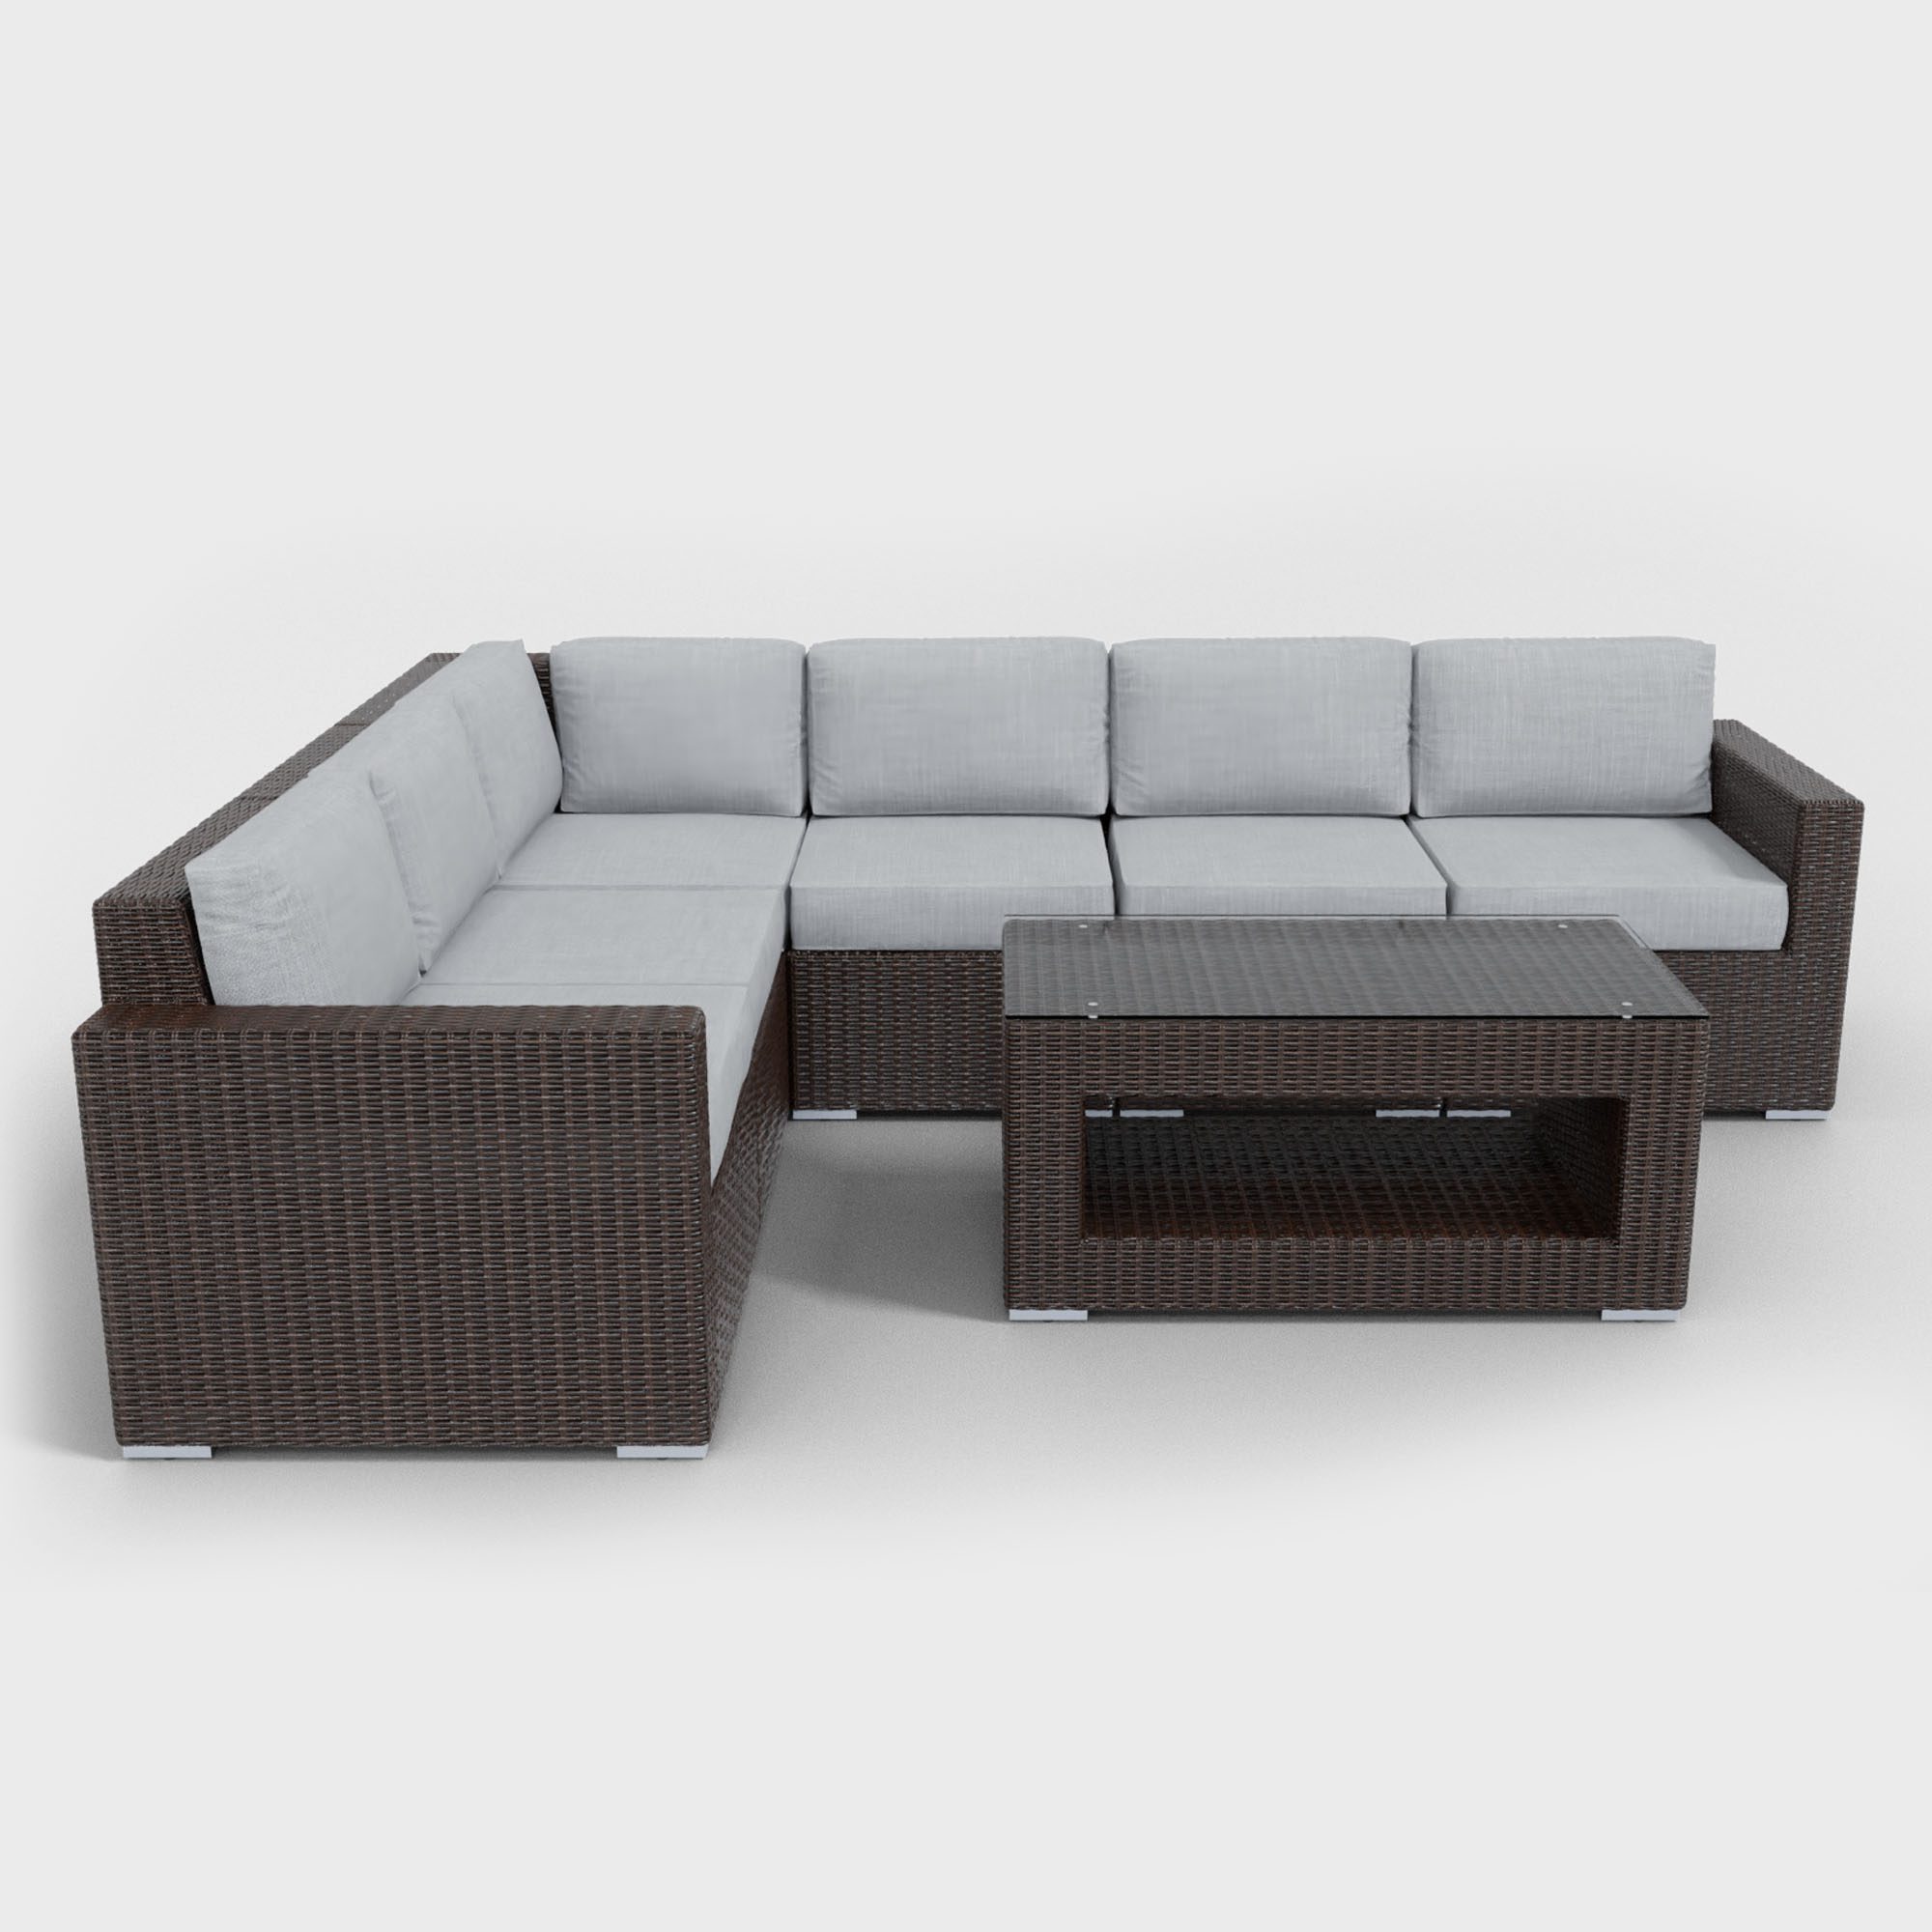 The Sectional 7 Piece Light Gray